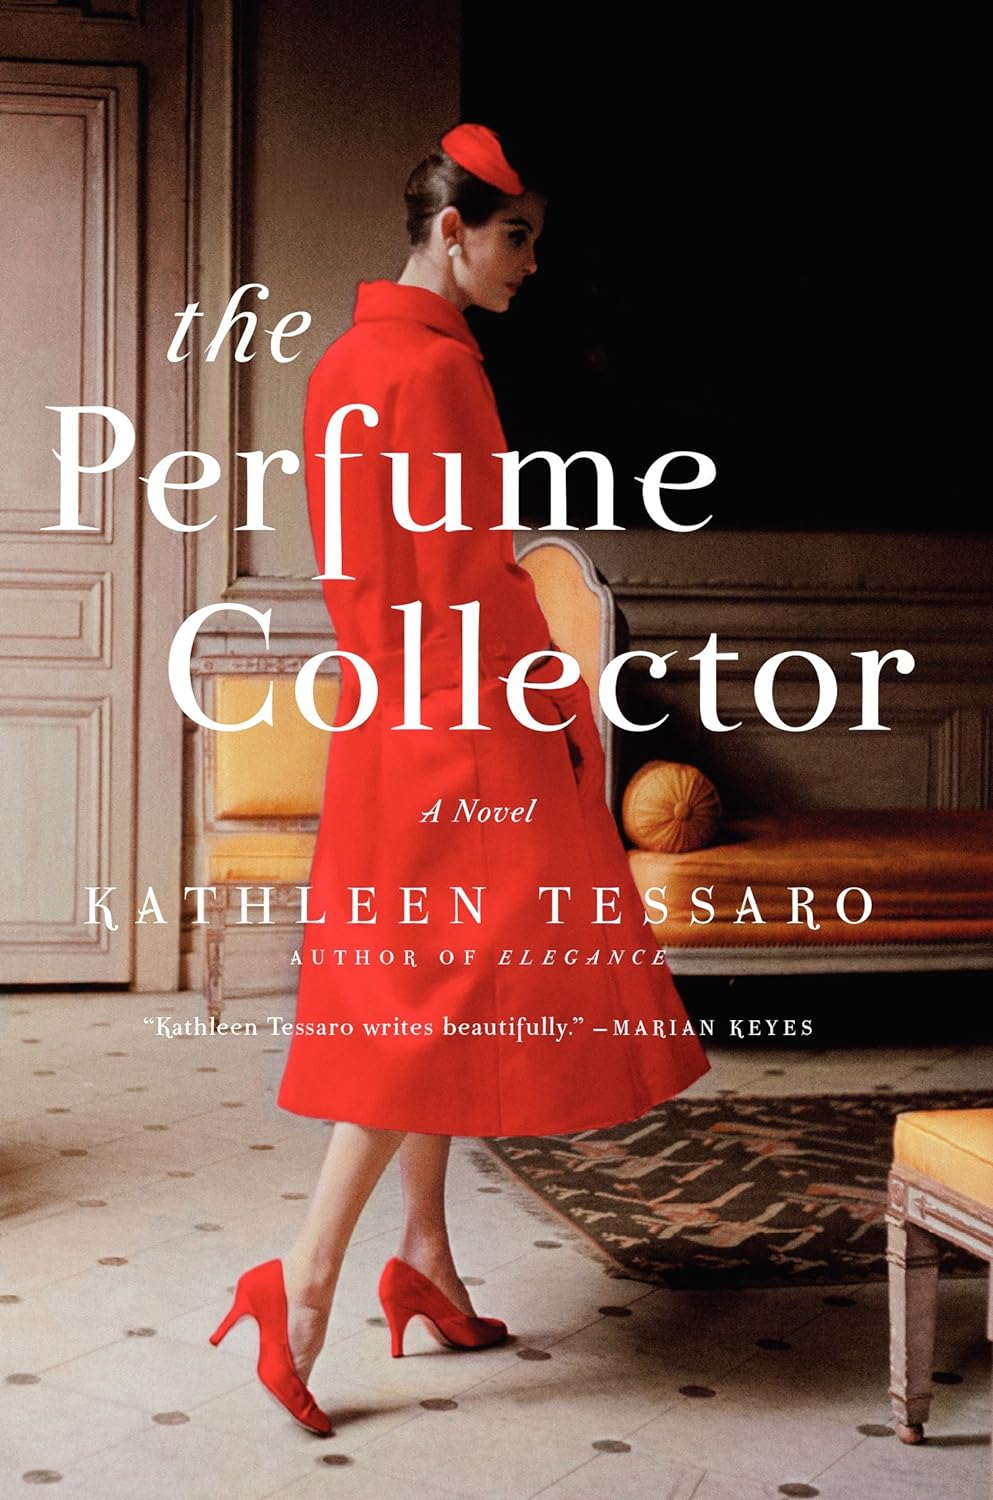 Books about Perfumery8